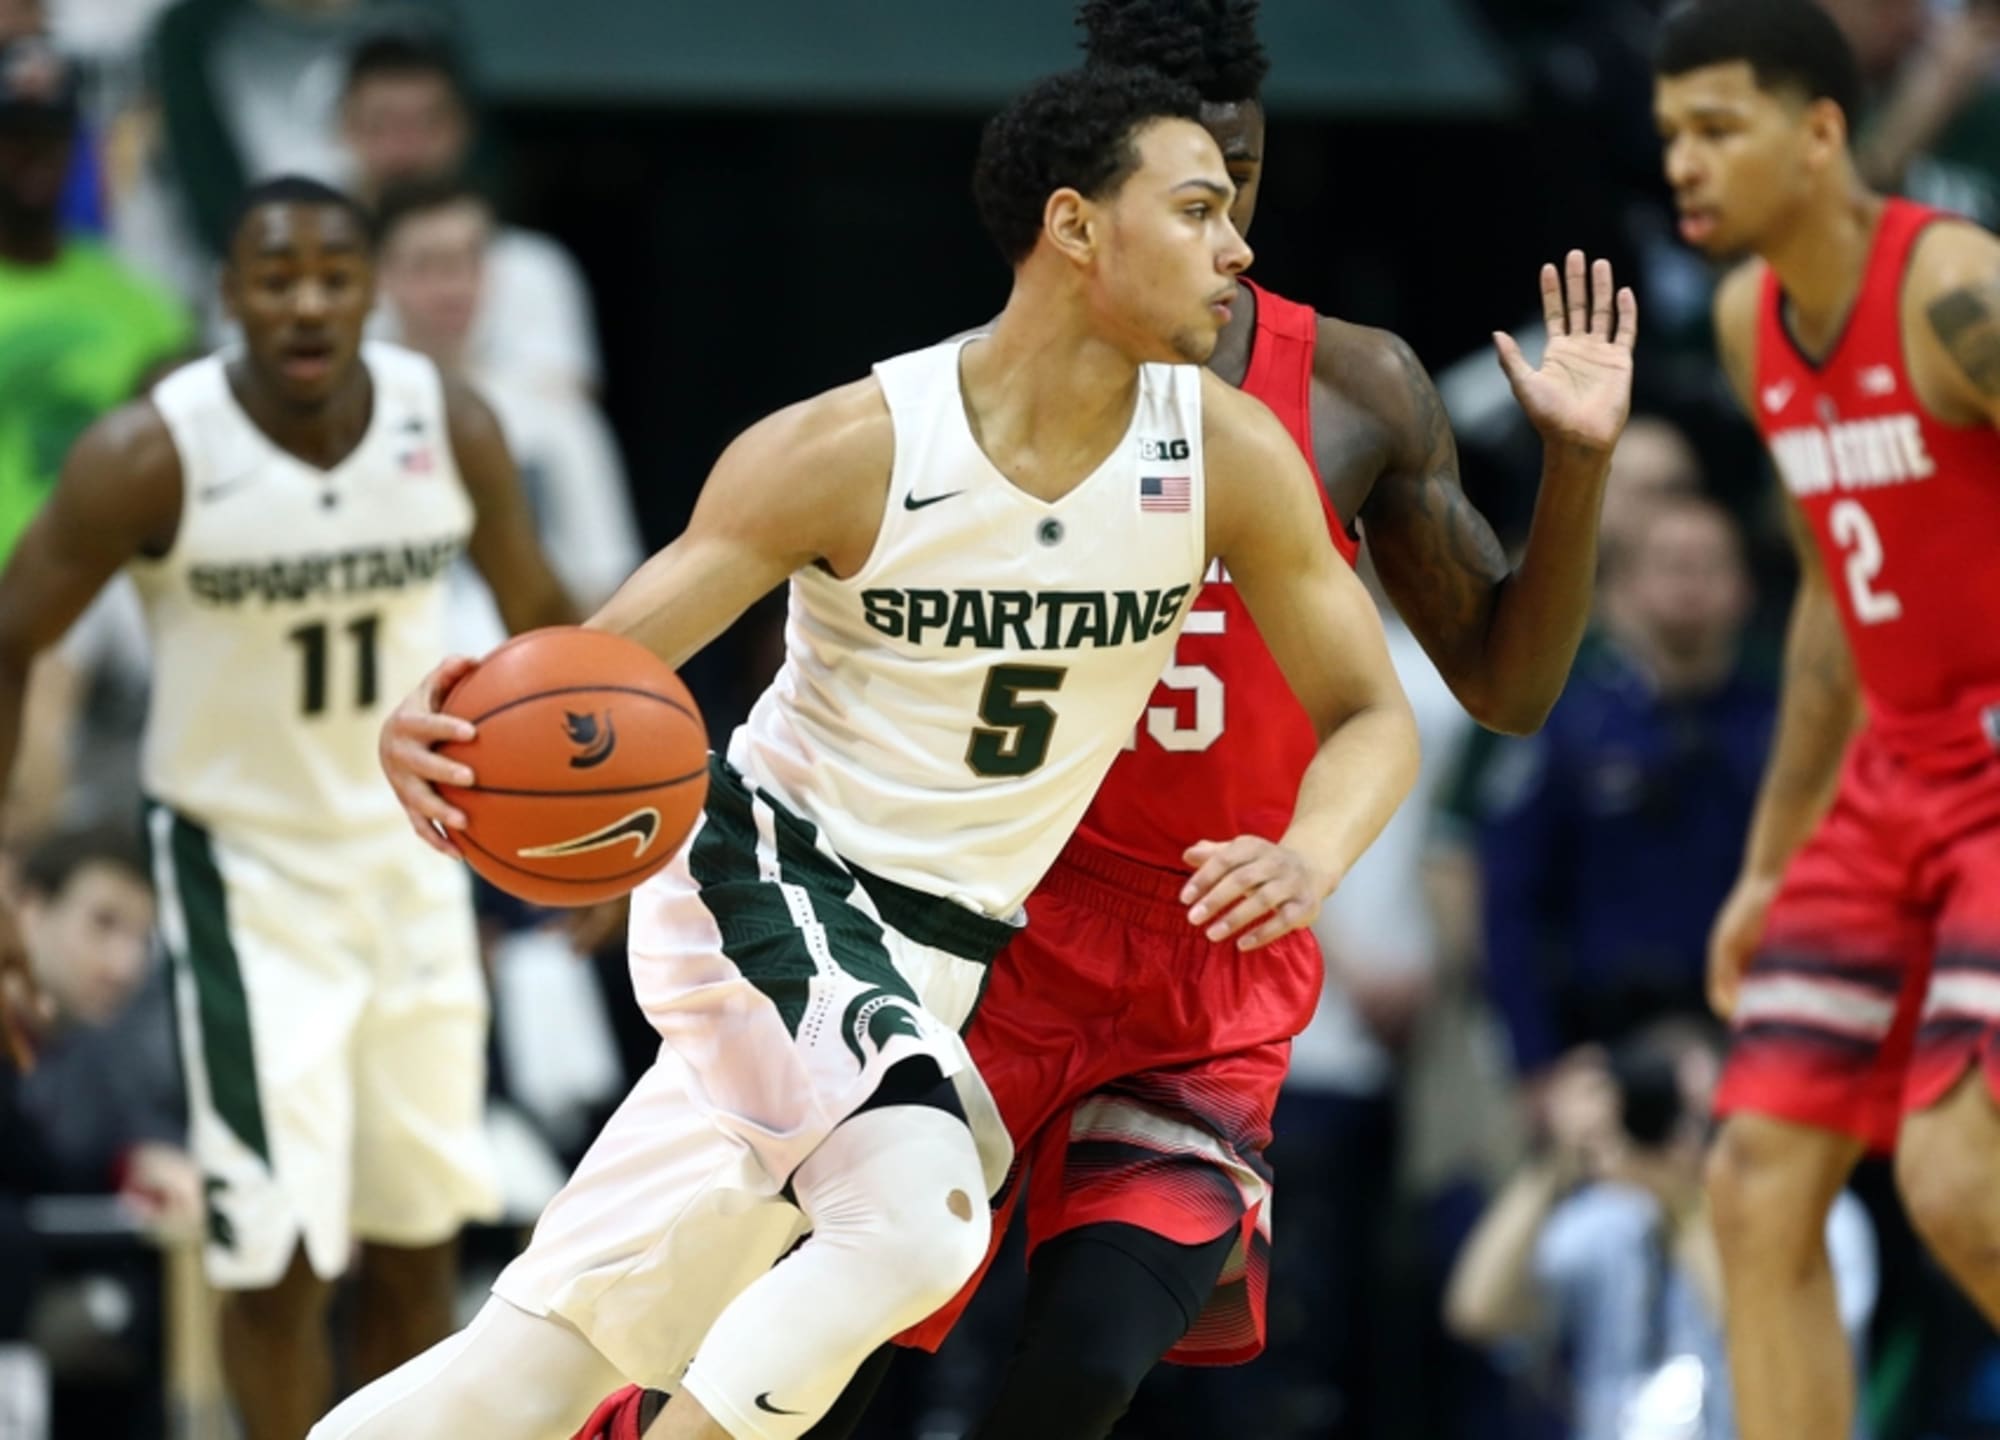 Meet the Spartans: Taking a look at Michigan State's 2016-17